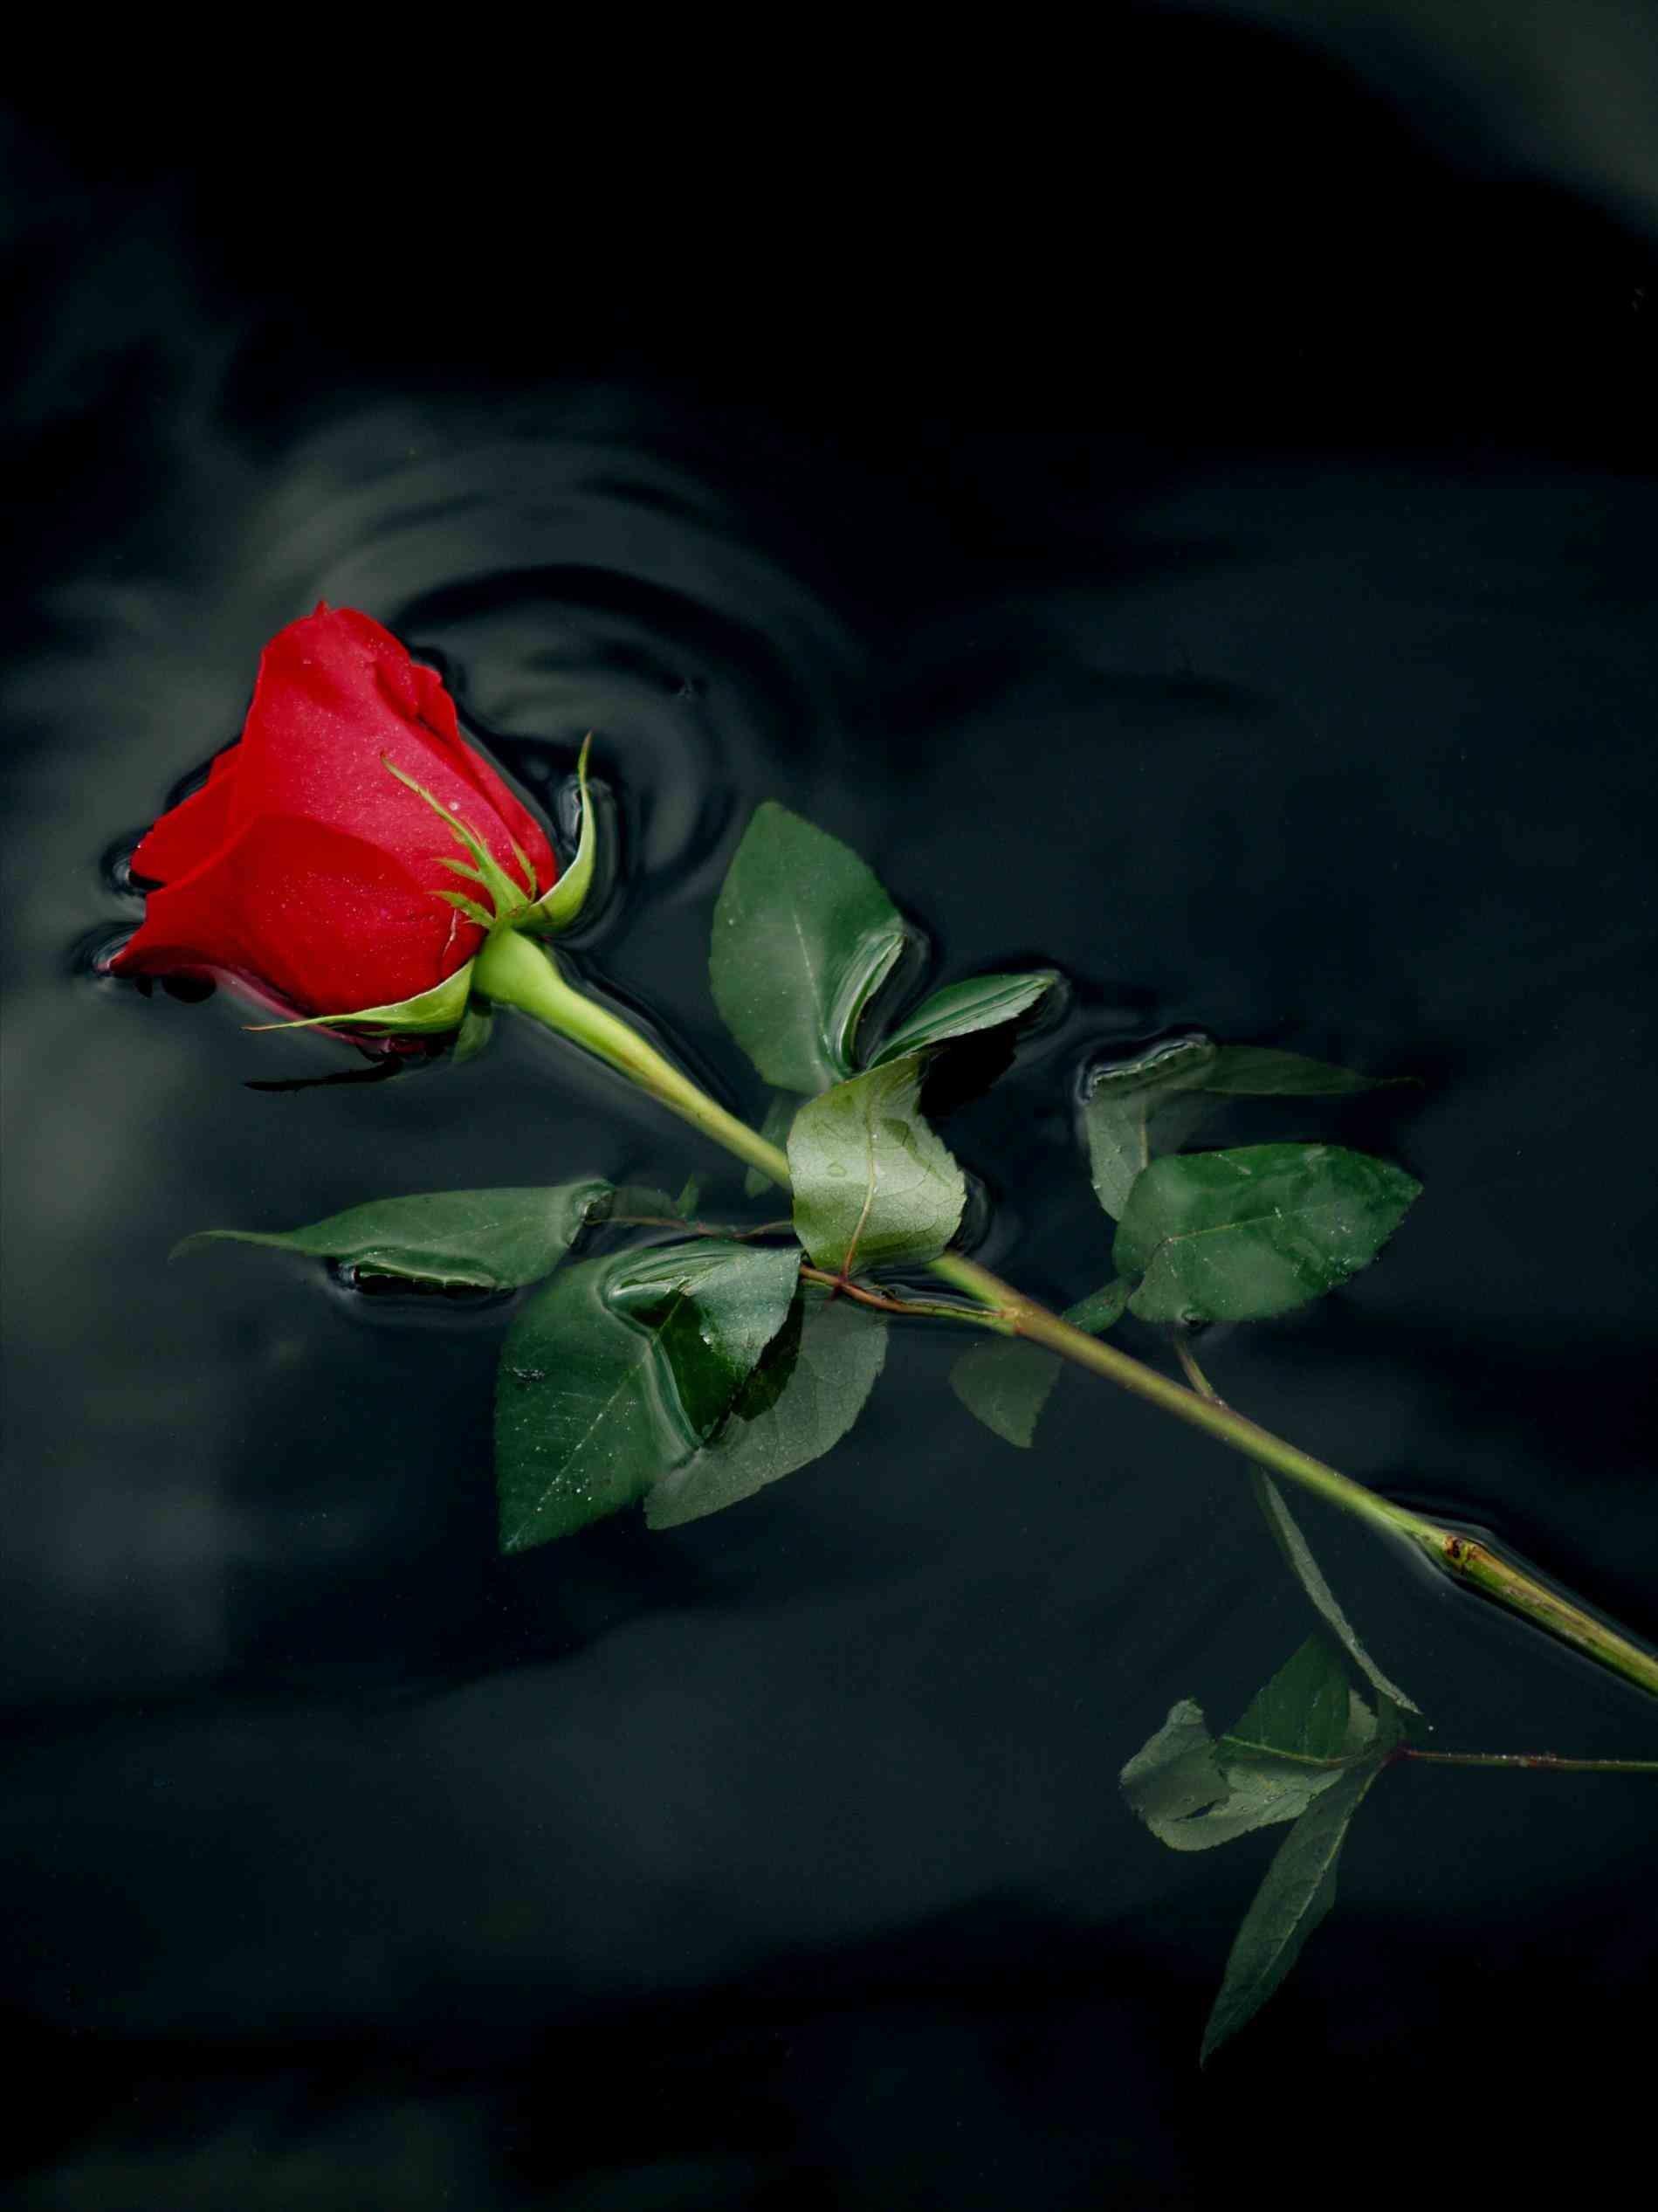 Of A Wallpaper HD Image Picture Of Single Red Roses